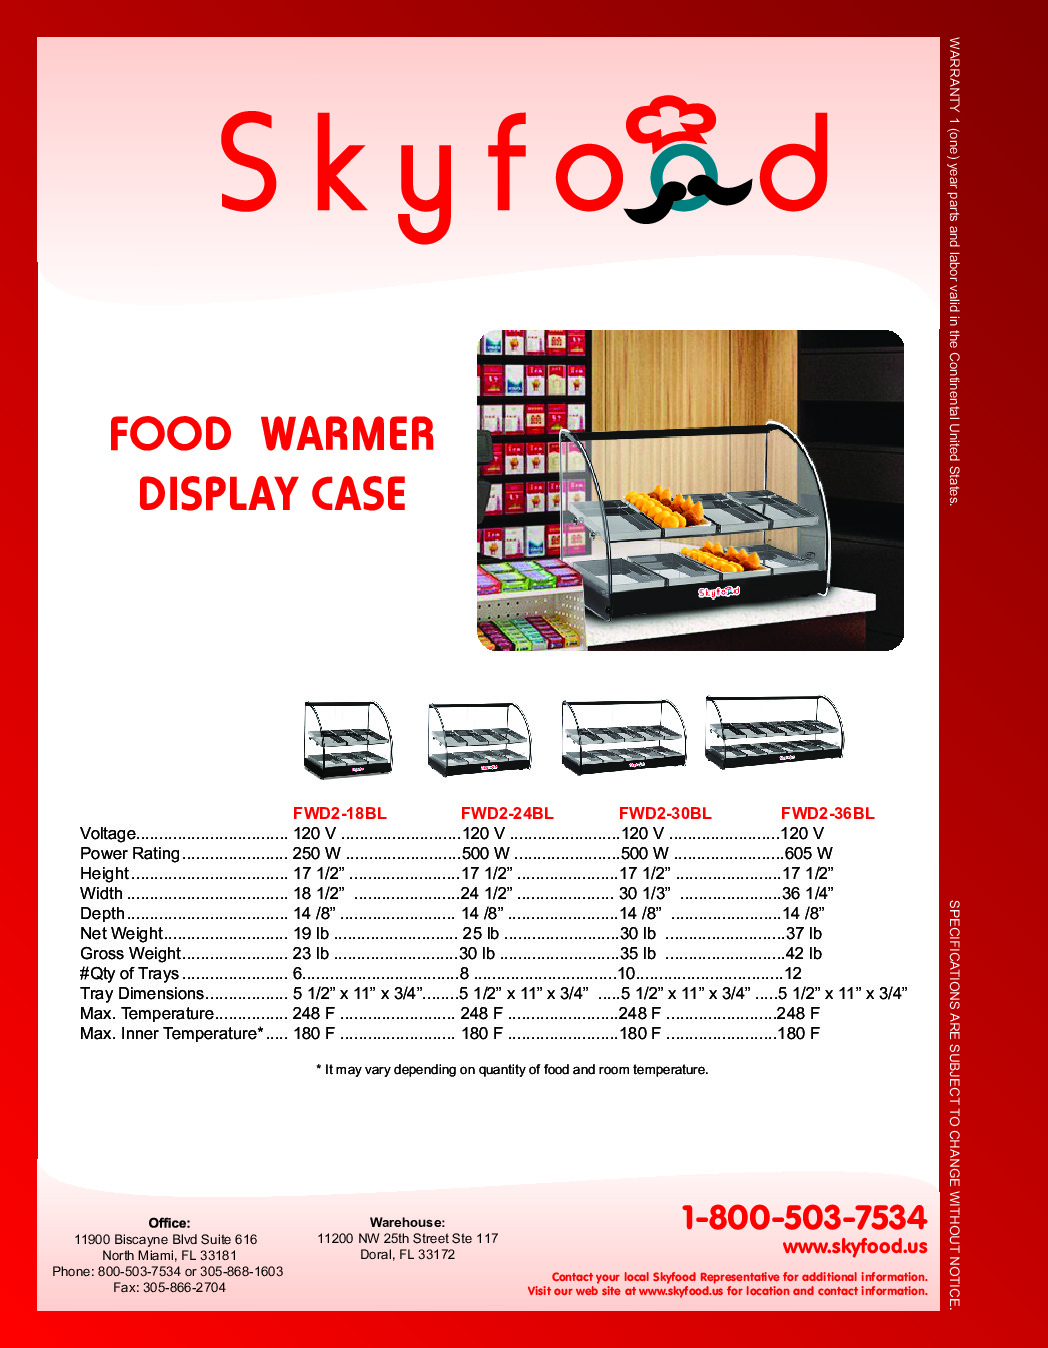 Skyfood FWD2-30BL Countertop Heated Deli Display Case